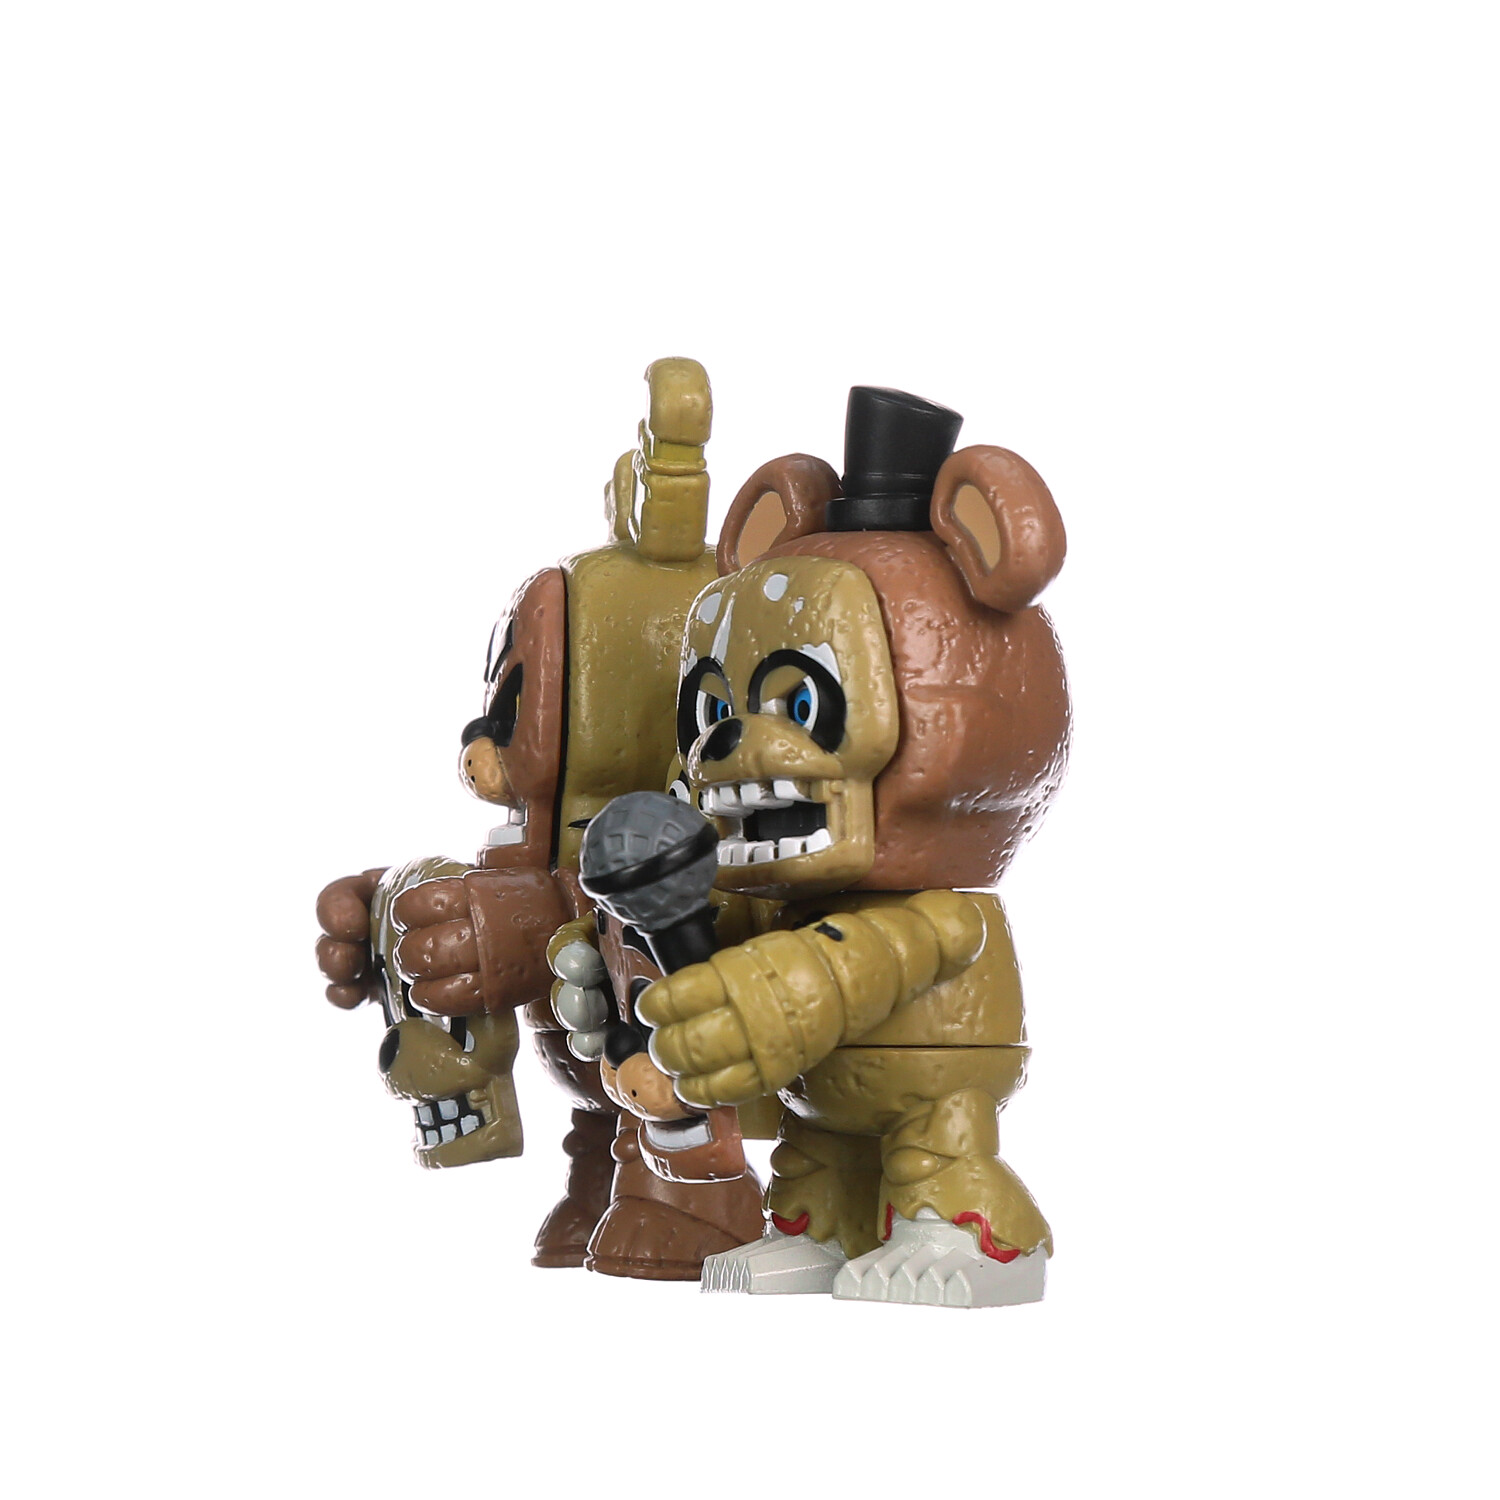 Funko Snaps!: Five Nights at Freddy's - Freddy and Springtrap, 2 Pack